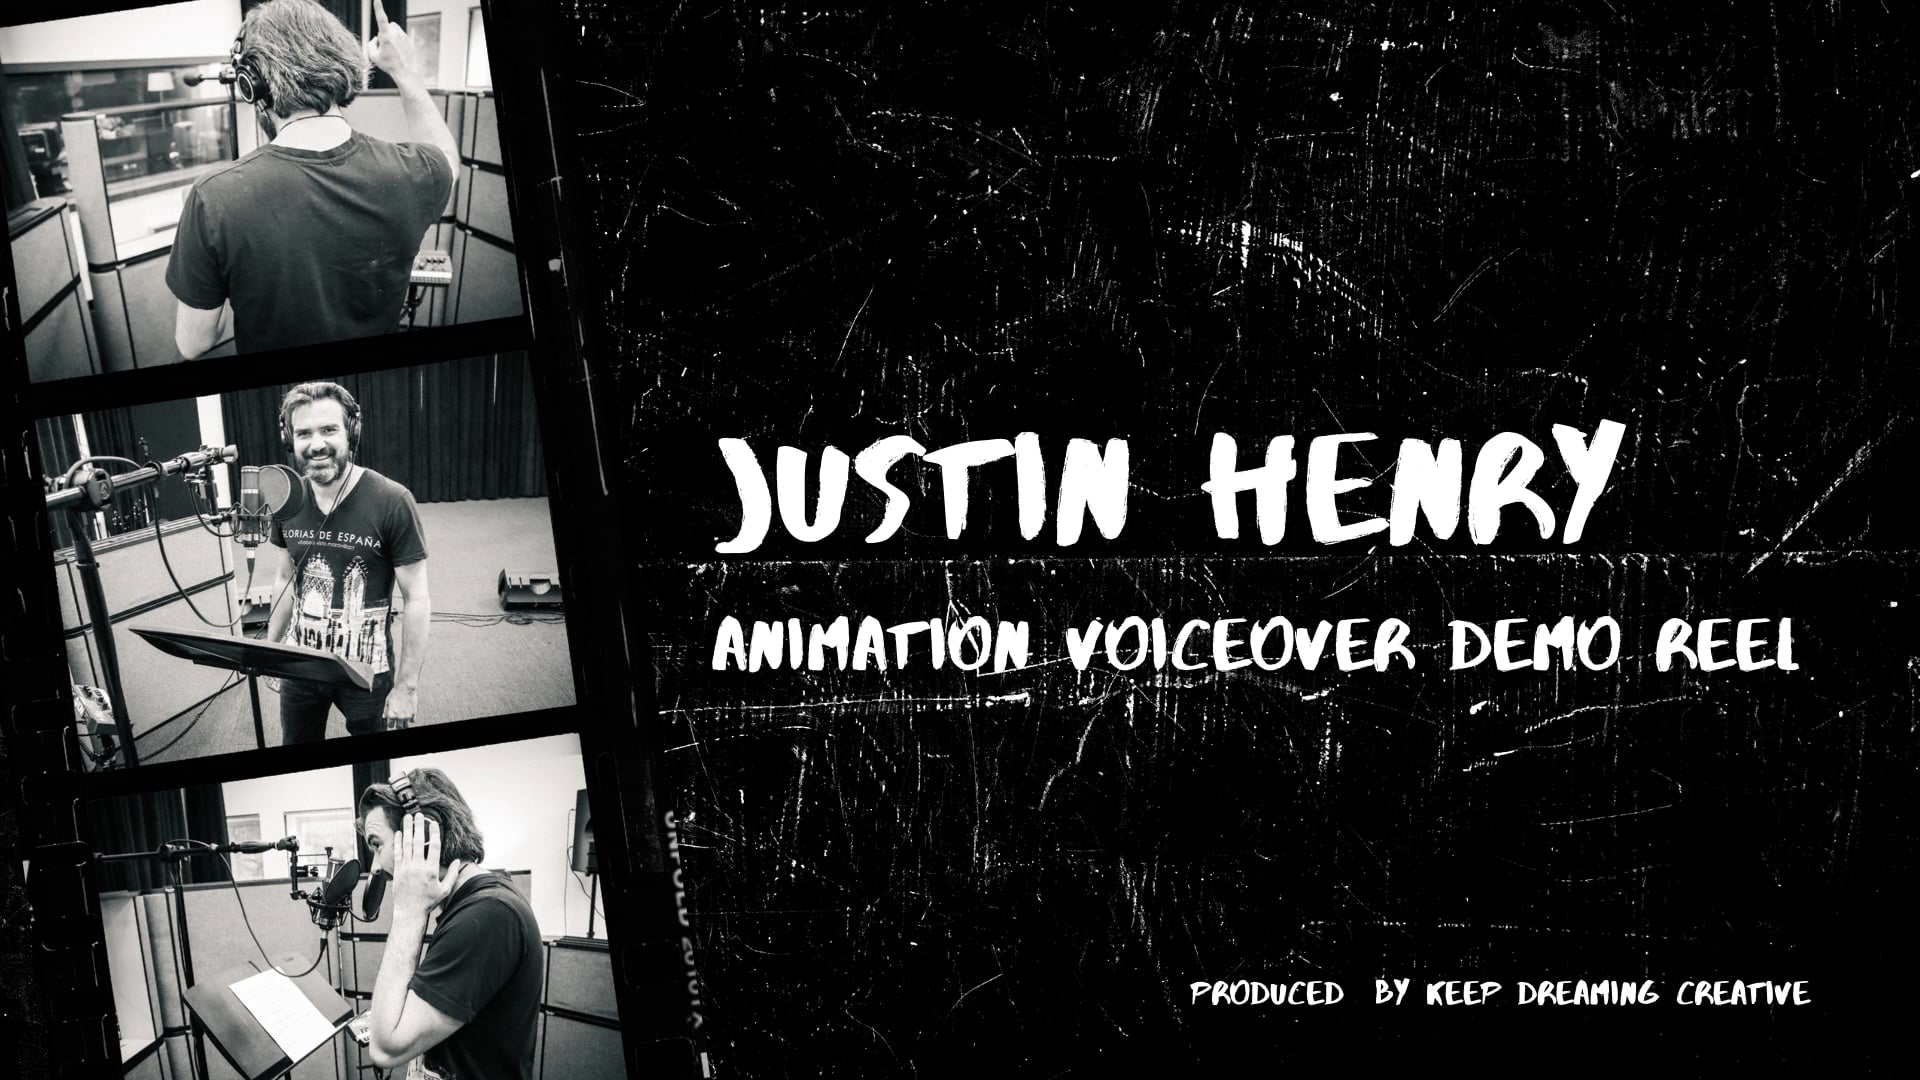 Justin Henry - Animation Voiceover Demo Reel